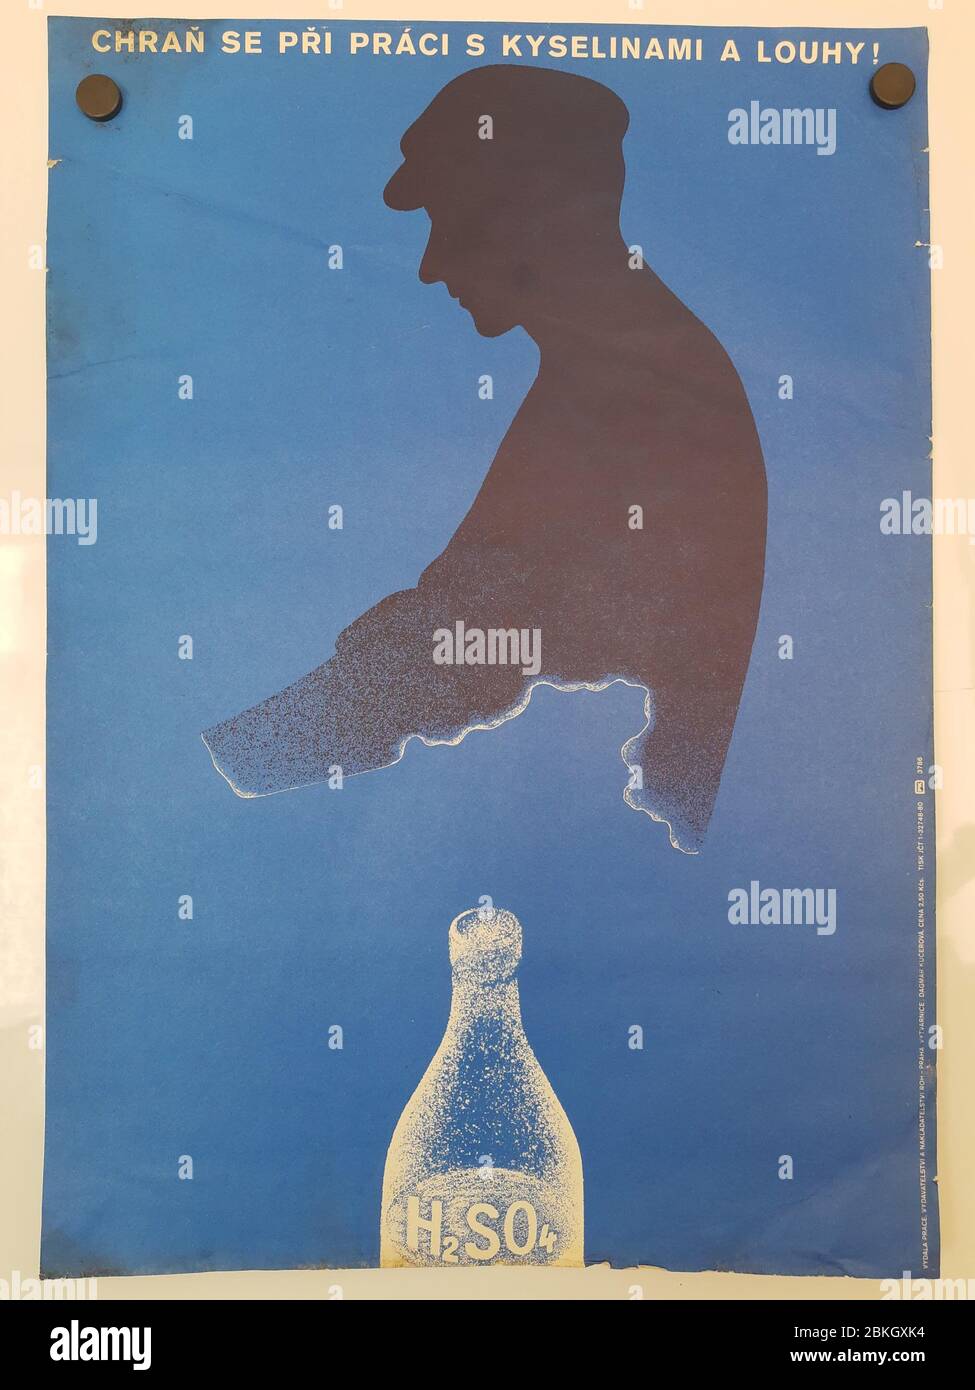 Acids and alkalis are dangerous. Soviet union (Czech) work safety posters from 70´s. Stock Photo